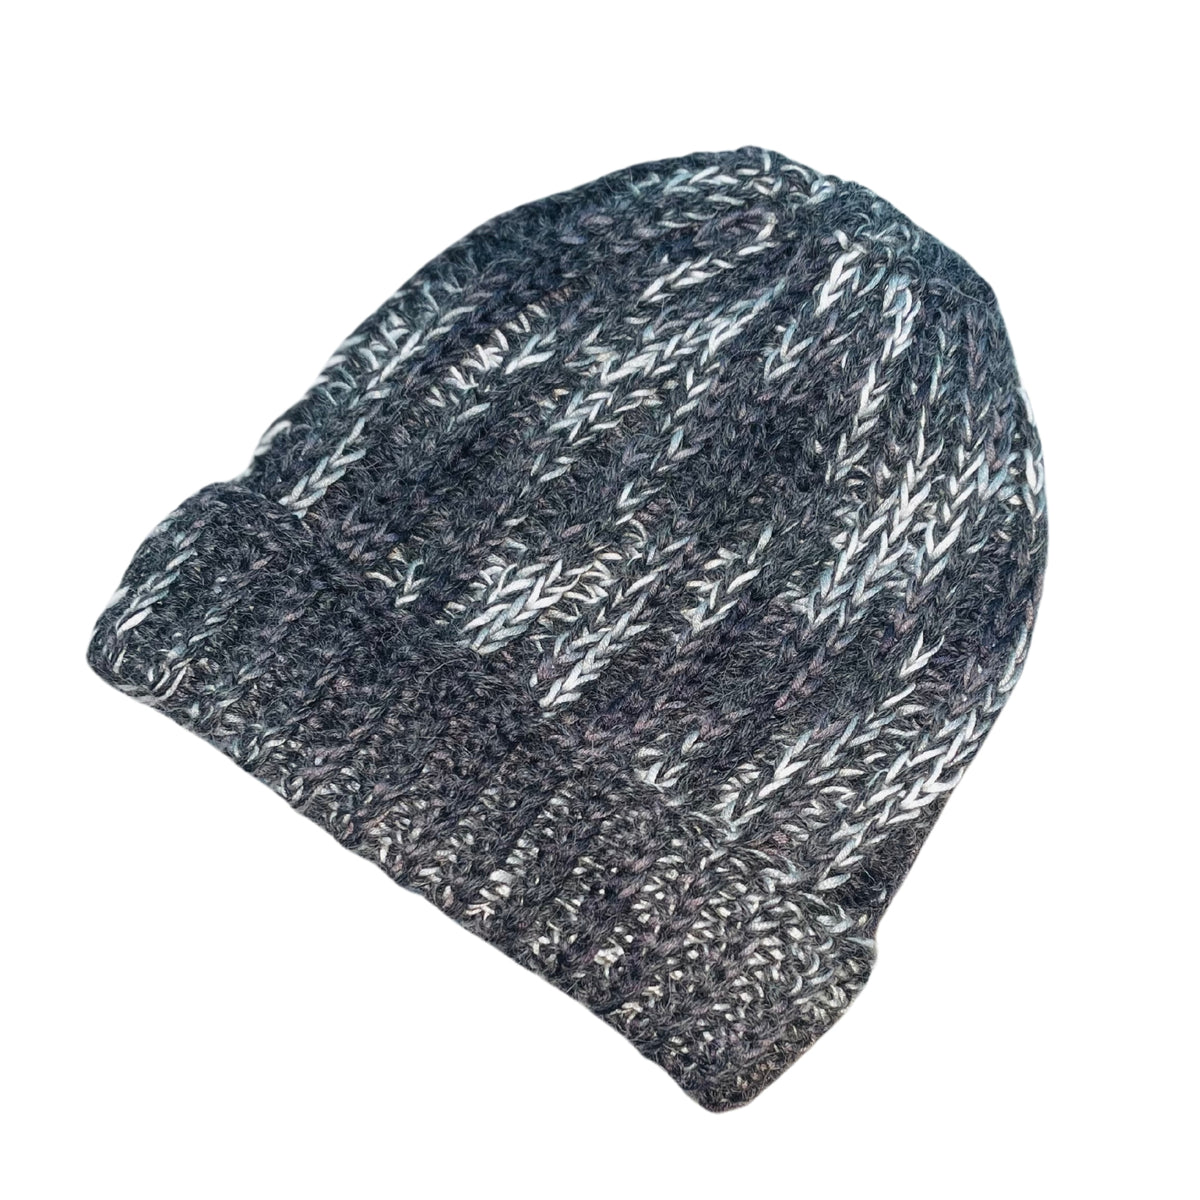 Black, charcoal, dark gray, light gray, and white colored cozy soft warm handmade knitted crochet ridge ribbed hat made in Montana by Alpacas of Montana.